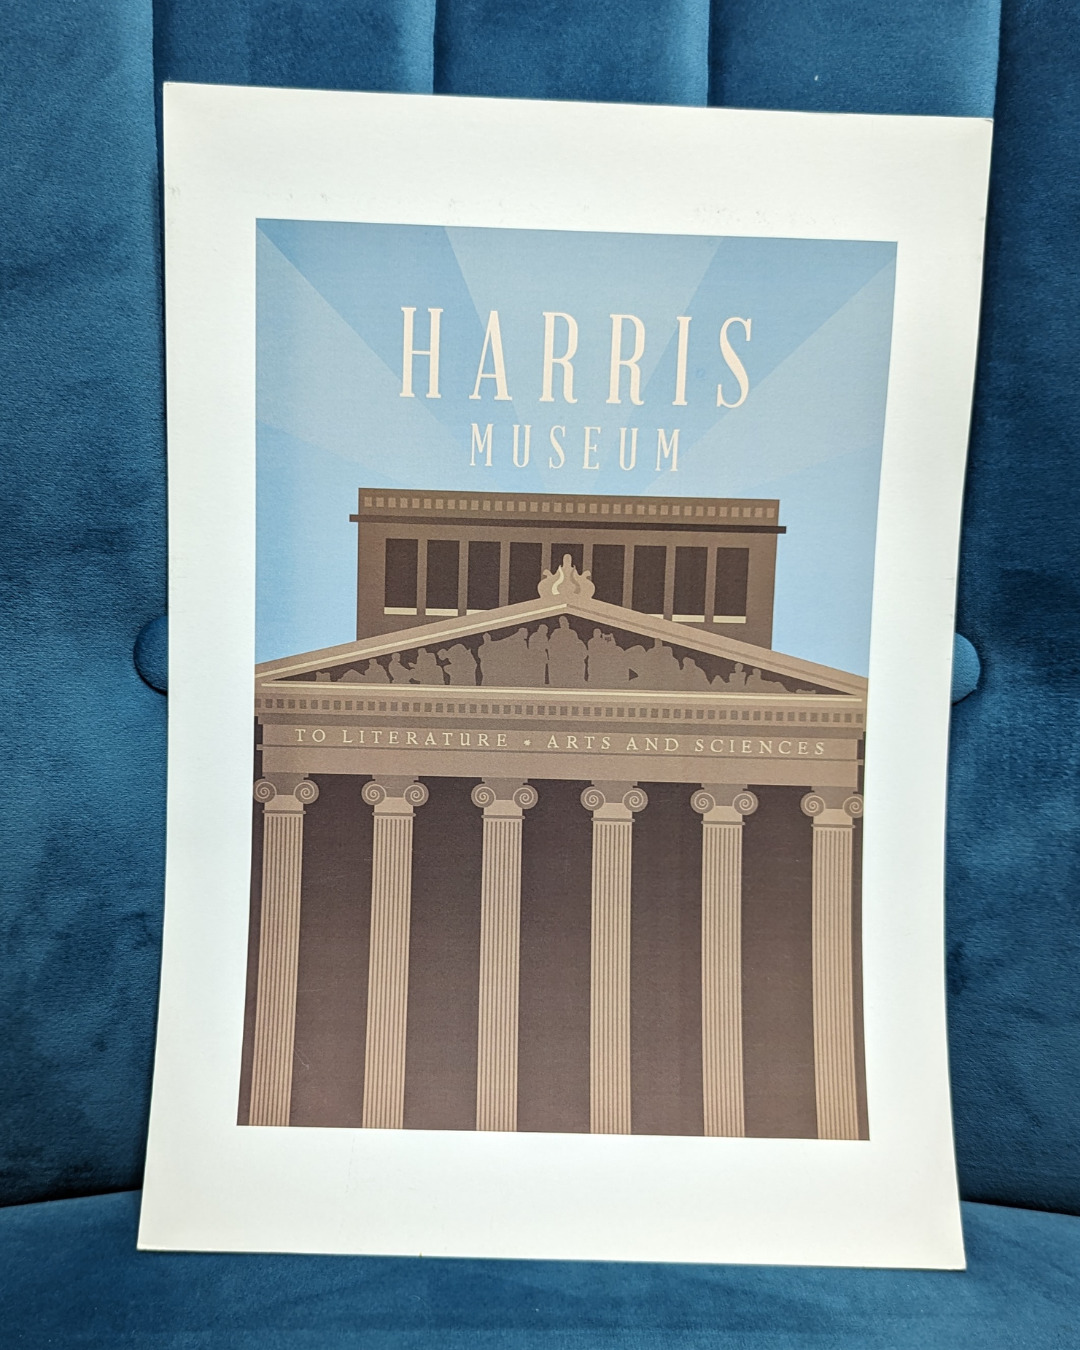 An illustration of the Harris building